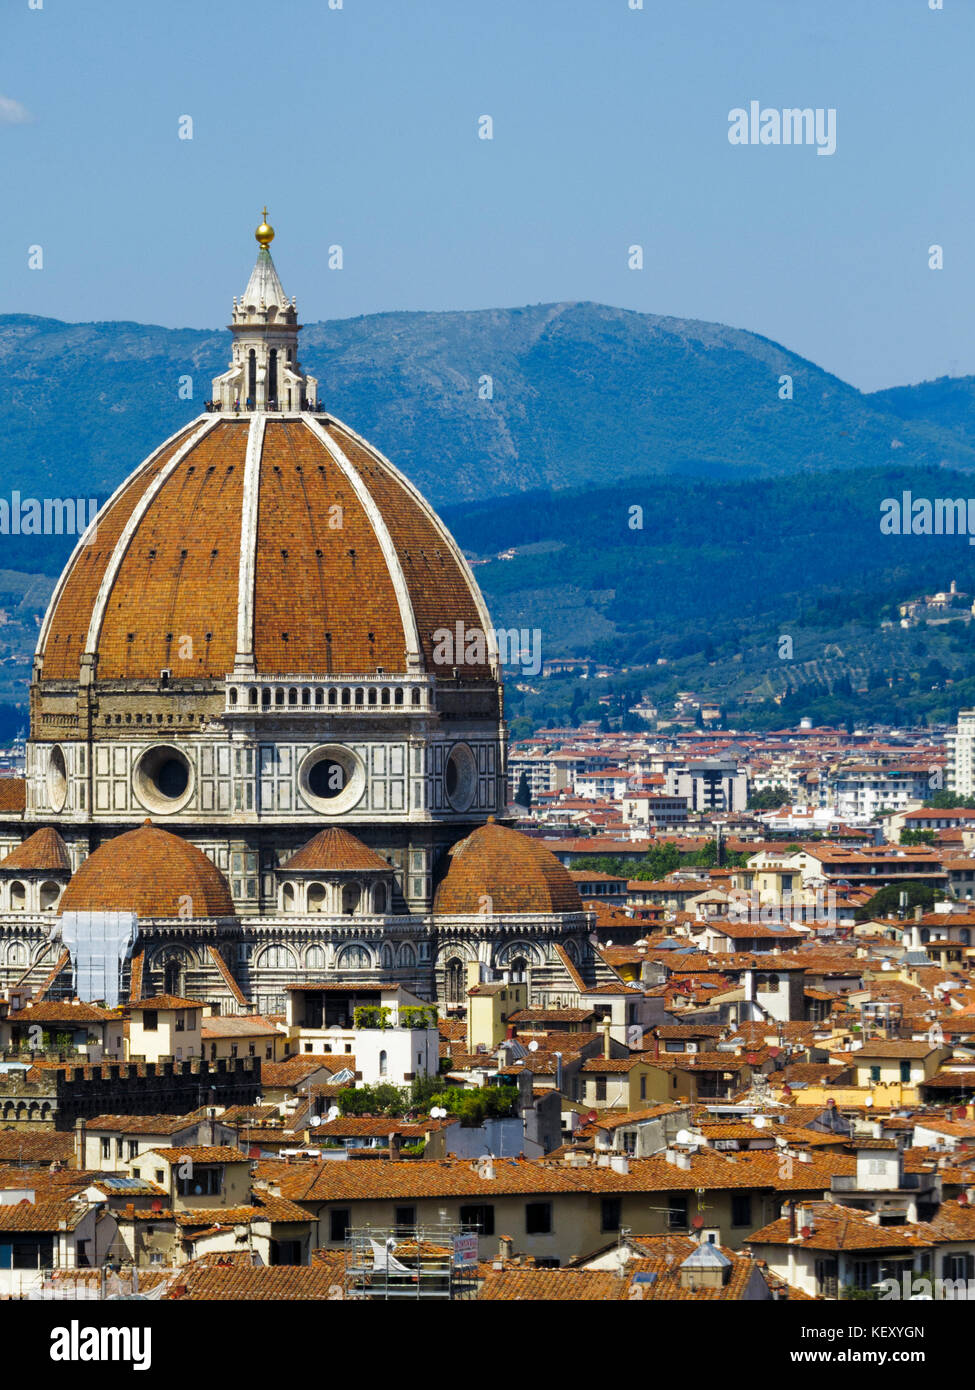 Il Duomo di Firenze (Florence Cathedral). Florence, Tuscany, Italy. Stock Photo